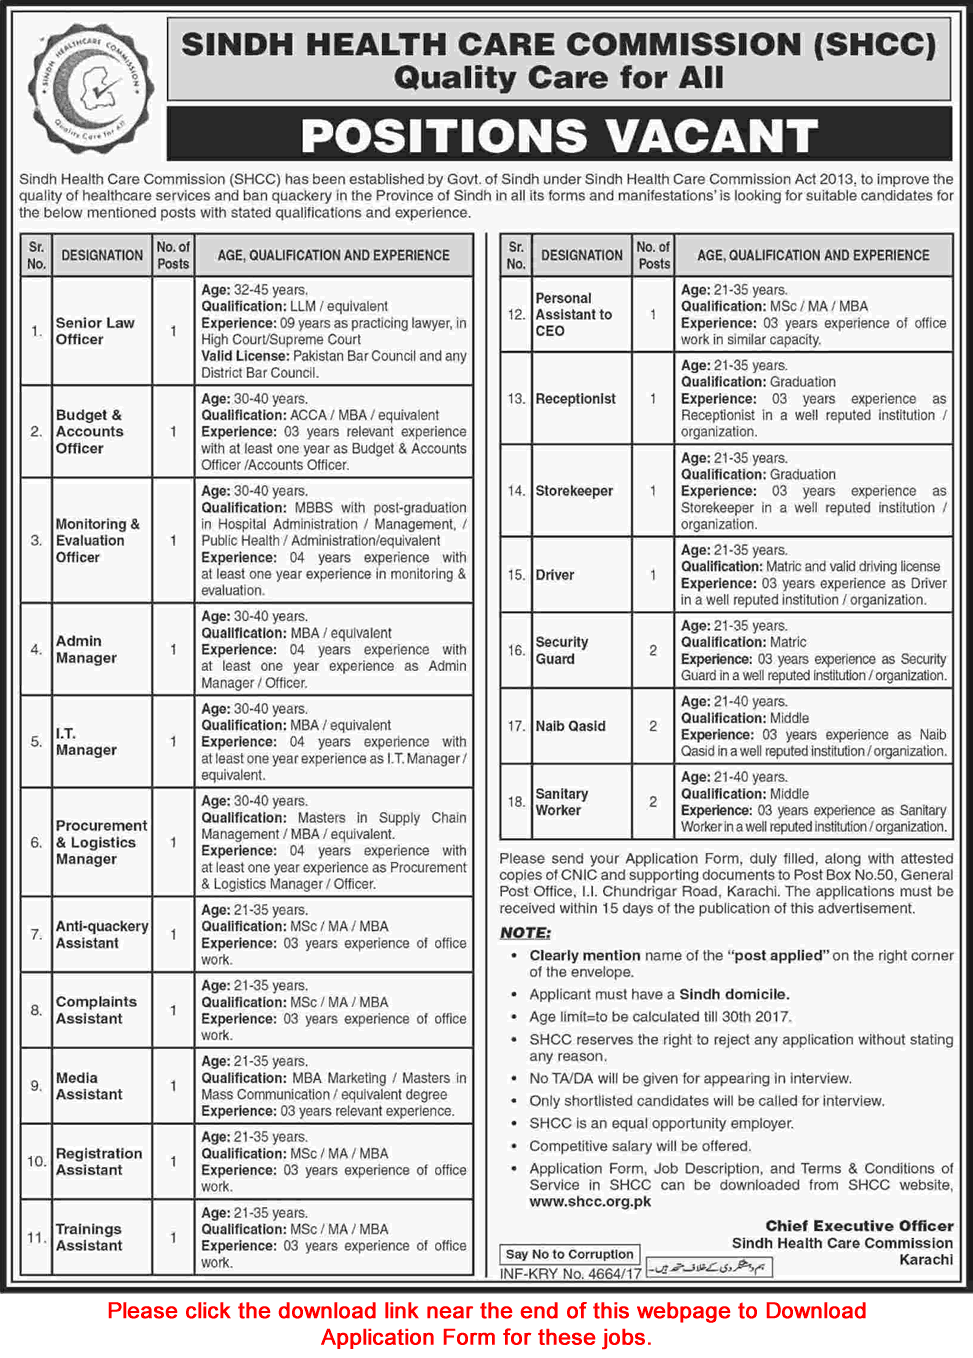 Sindh Healthcare Commission Jobs November 2017 Application Form Download SHCC Latest